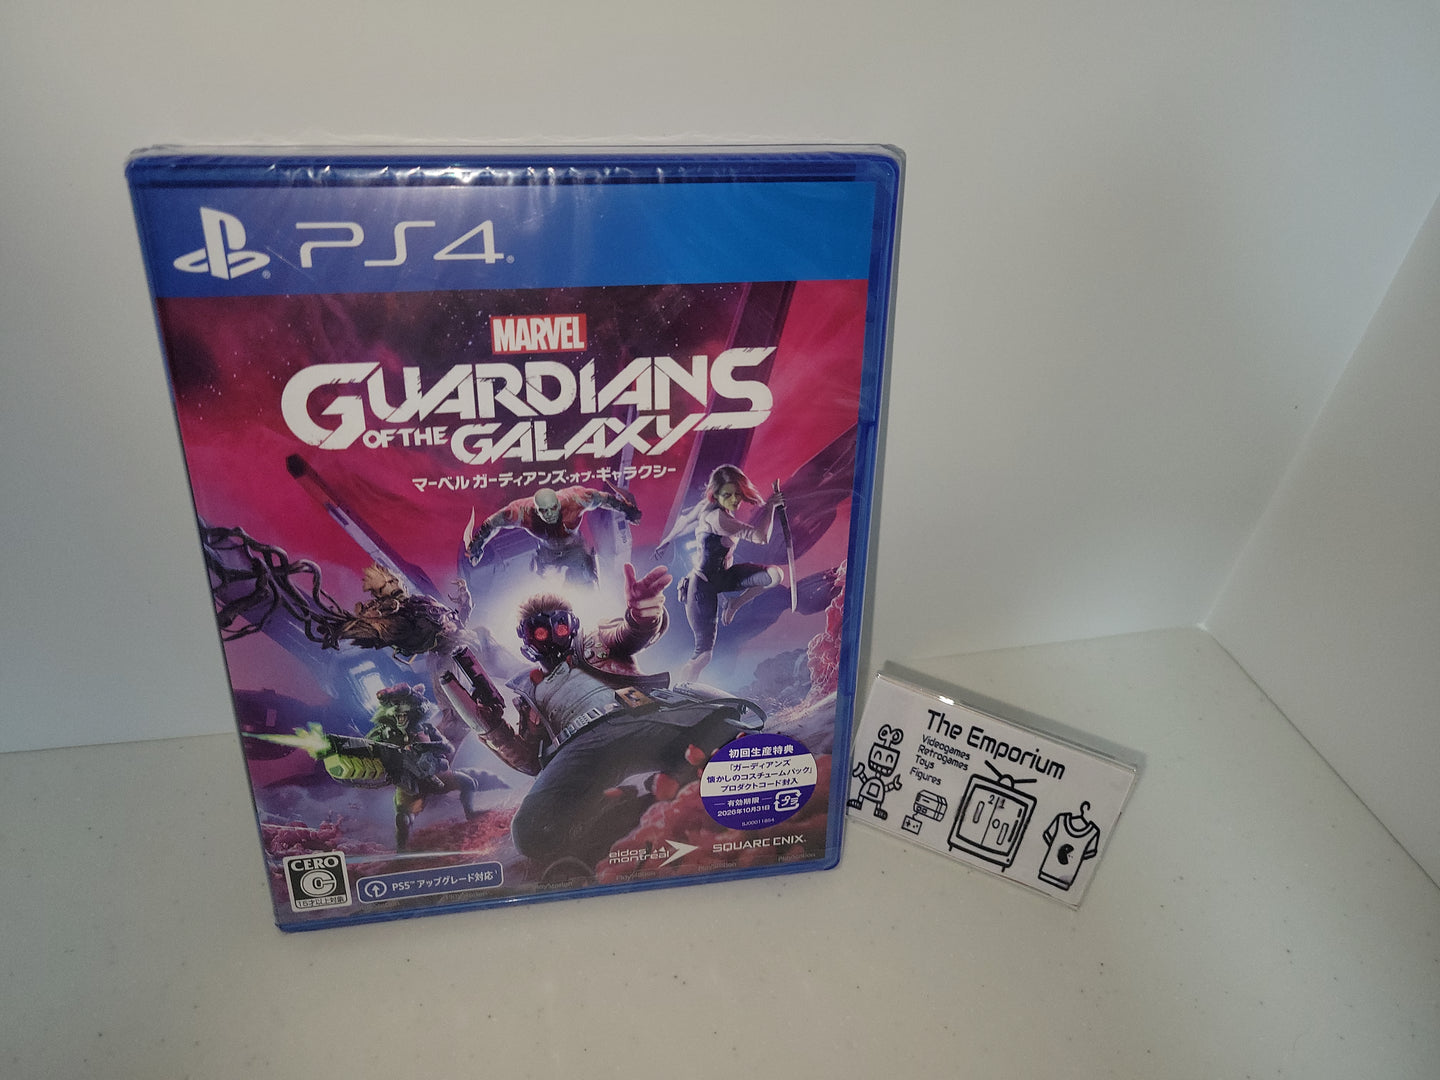 Guardians of the Galaxy - Sony PS4 Playstation 4